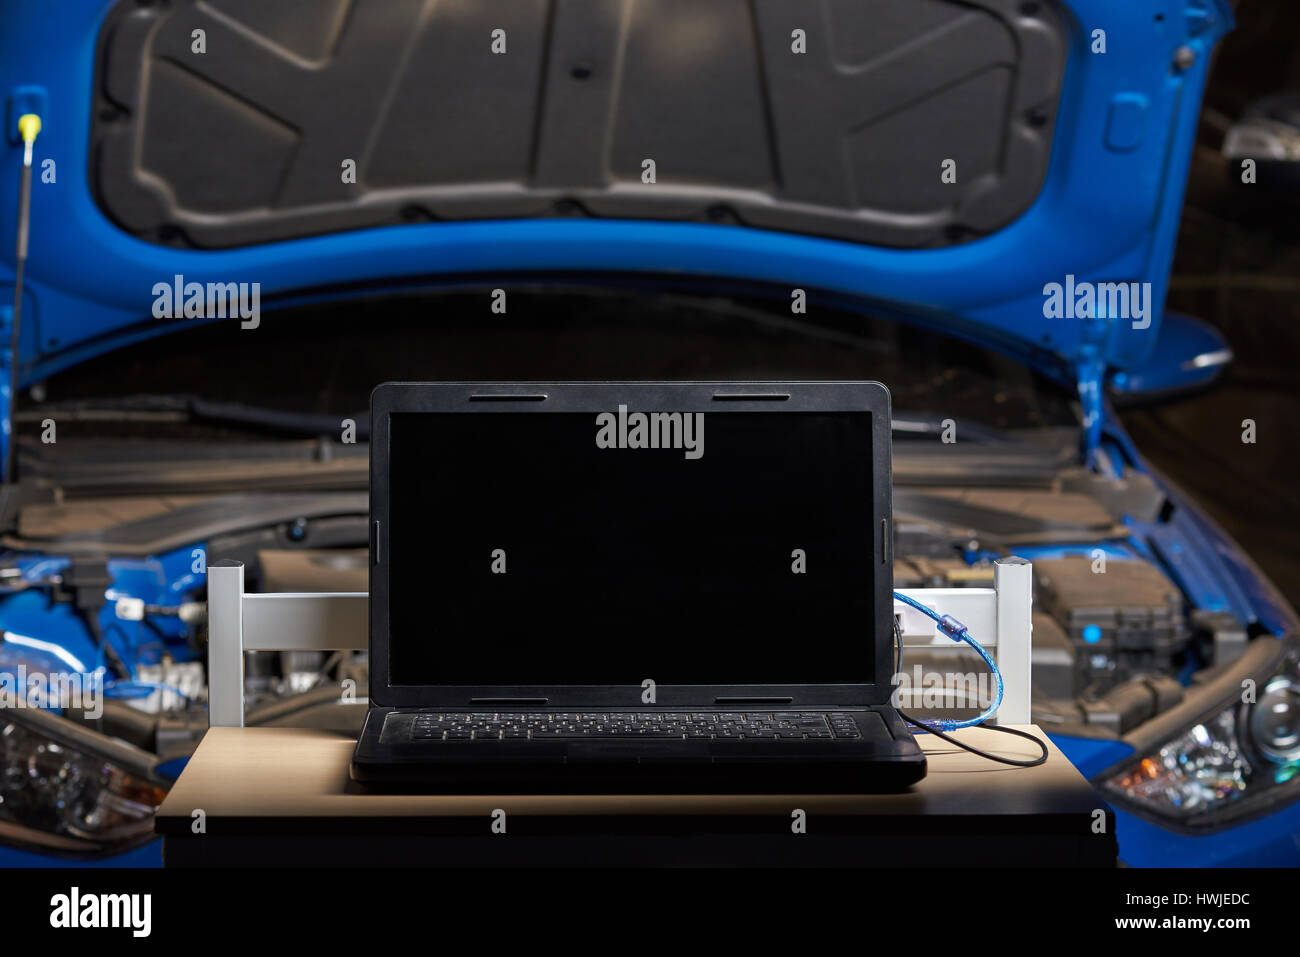 Laptop for computer car diagnostic on clean table station blurred blue vehicle open hood background Stock Photo